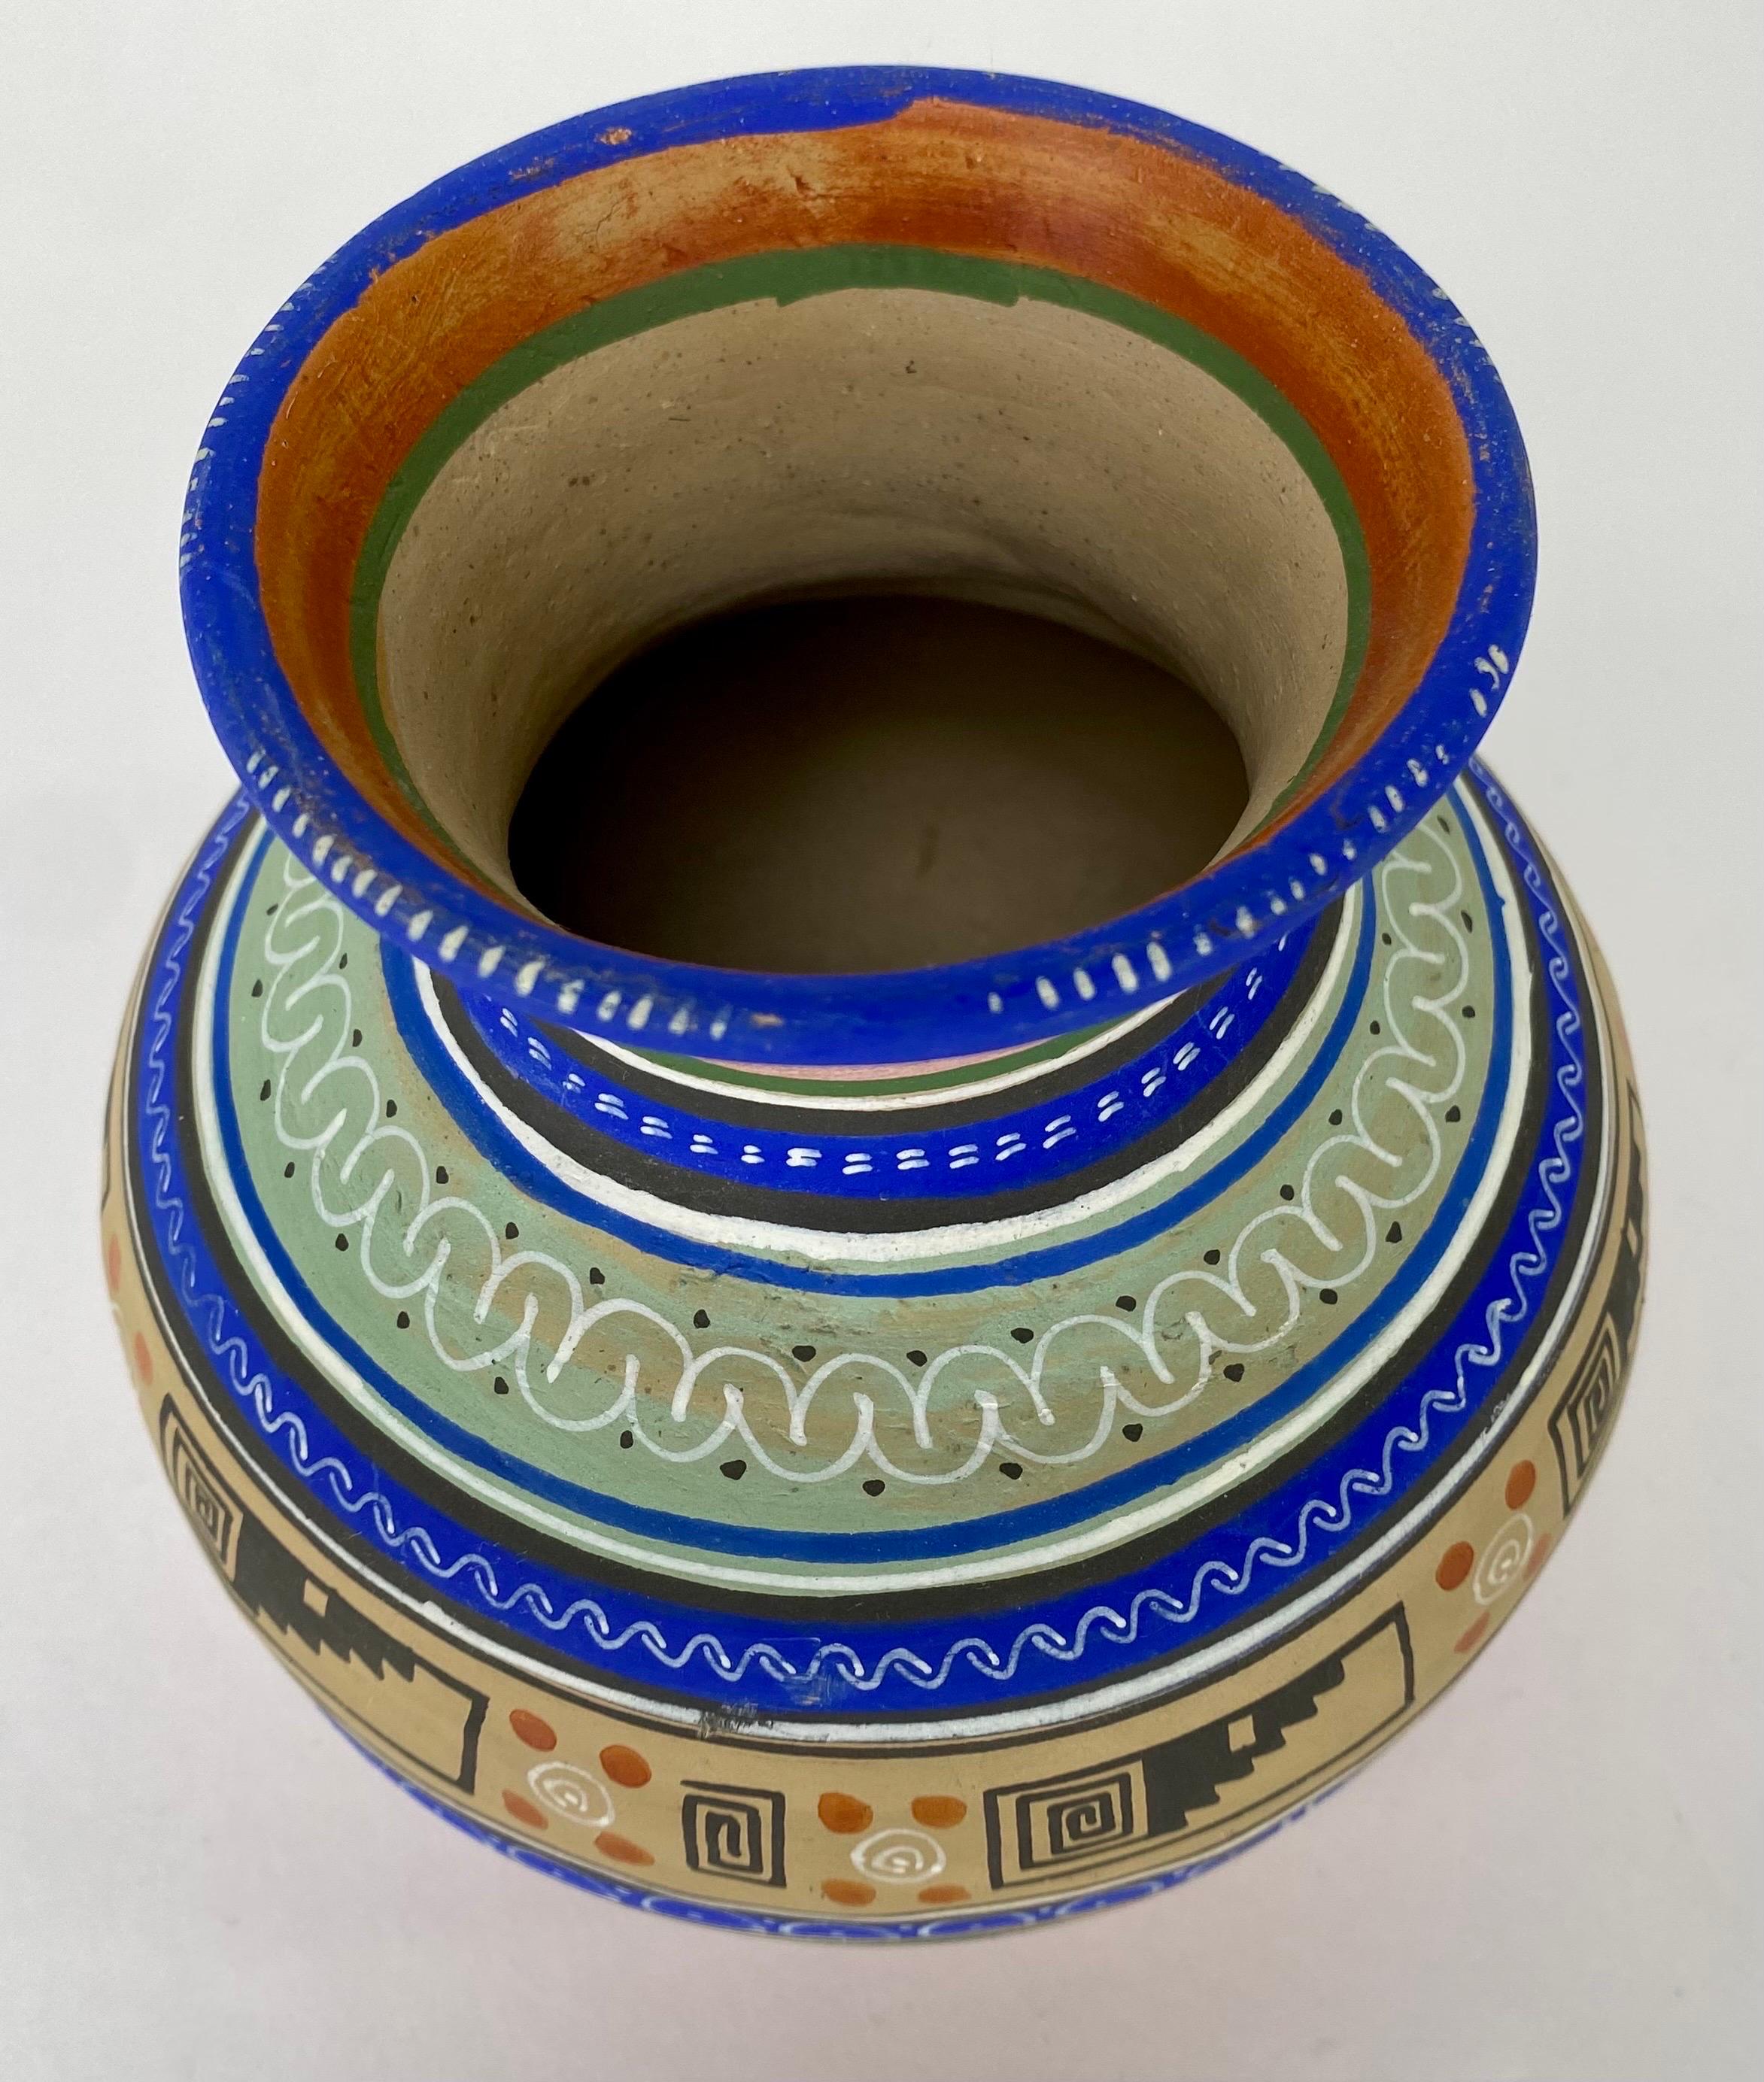 A Mexican tribal Handmade pottery small vase. The beautiful vase shows geometrical tribal motifs and is hand-painted in a beautiful electric dark blue, light green, beige and brown. The vase is a reflection of the rich Mexican culture and will add a